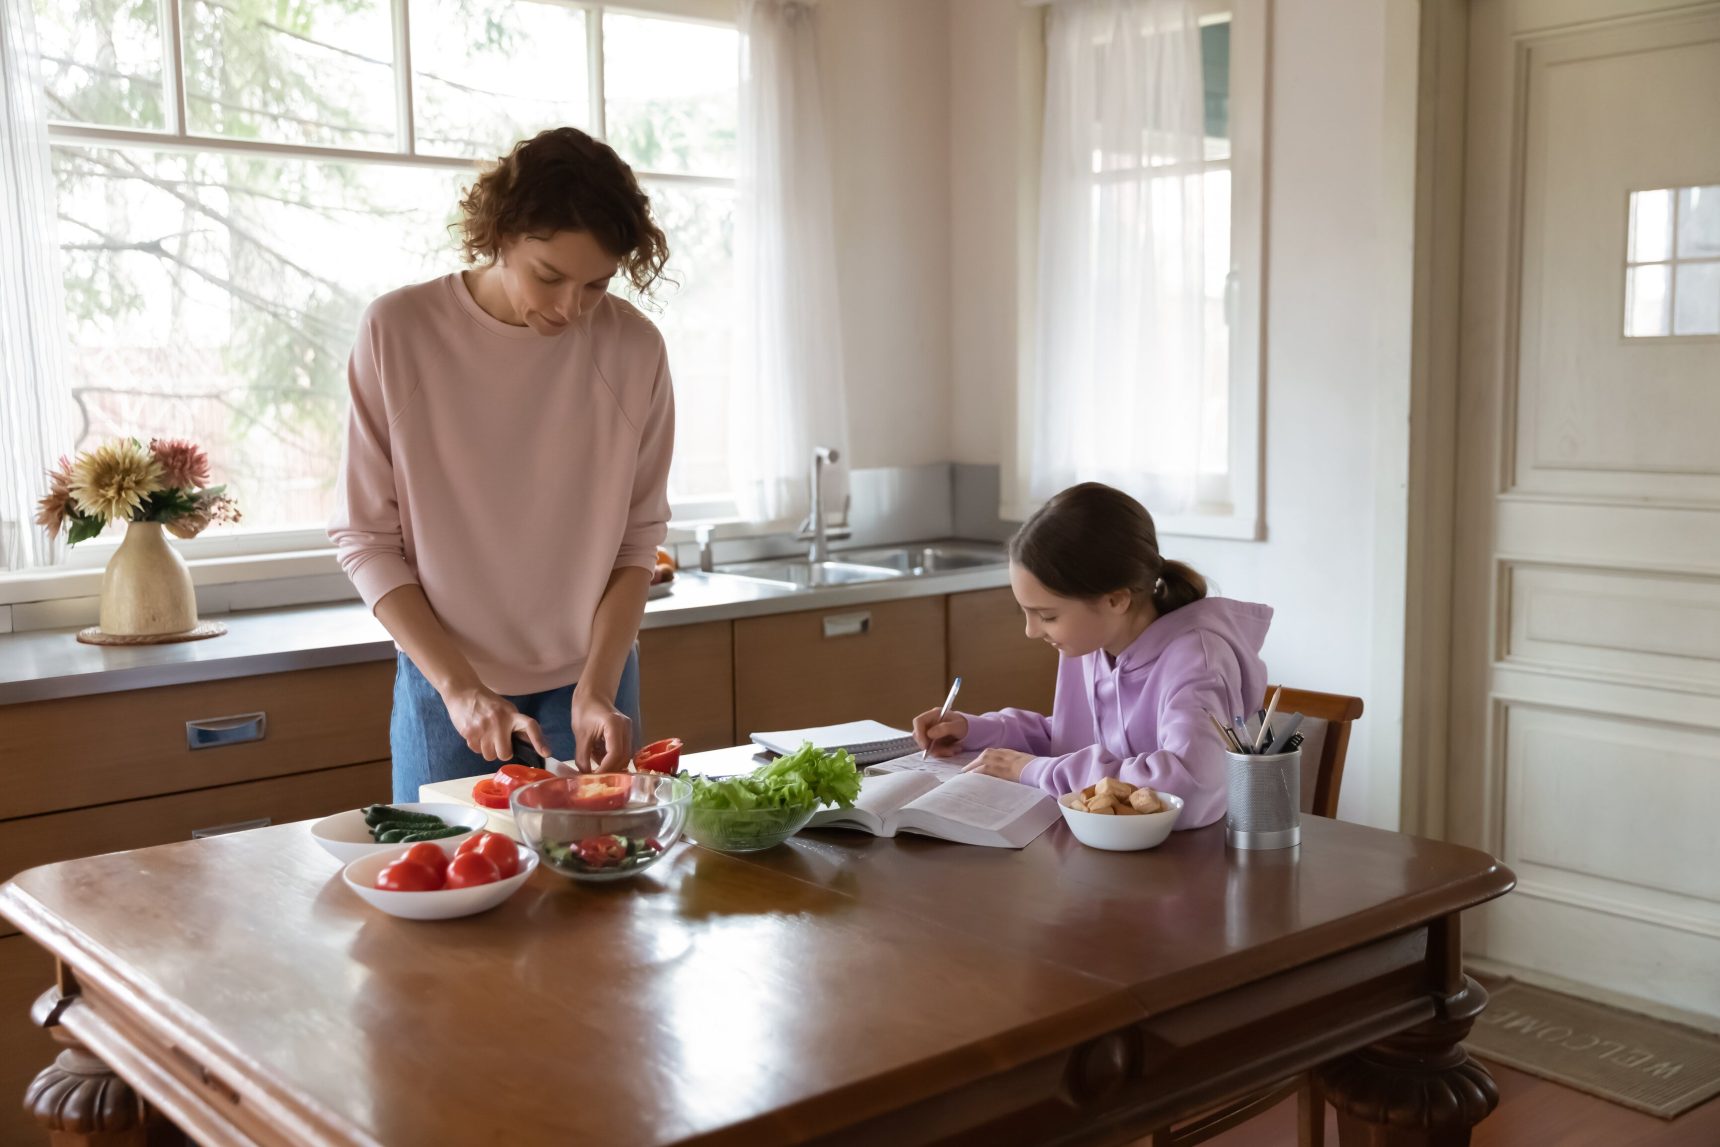 A teenage girl preparing for an exam whilst her mum cooks a healthy meal.